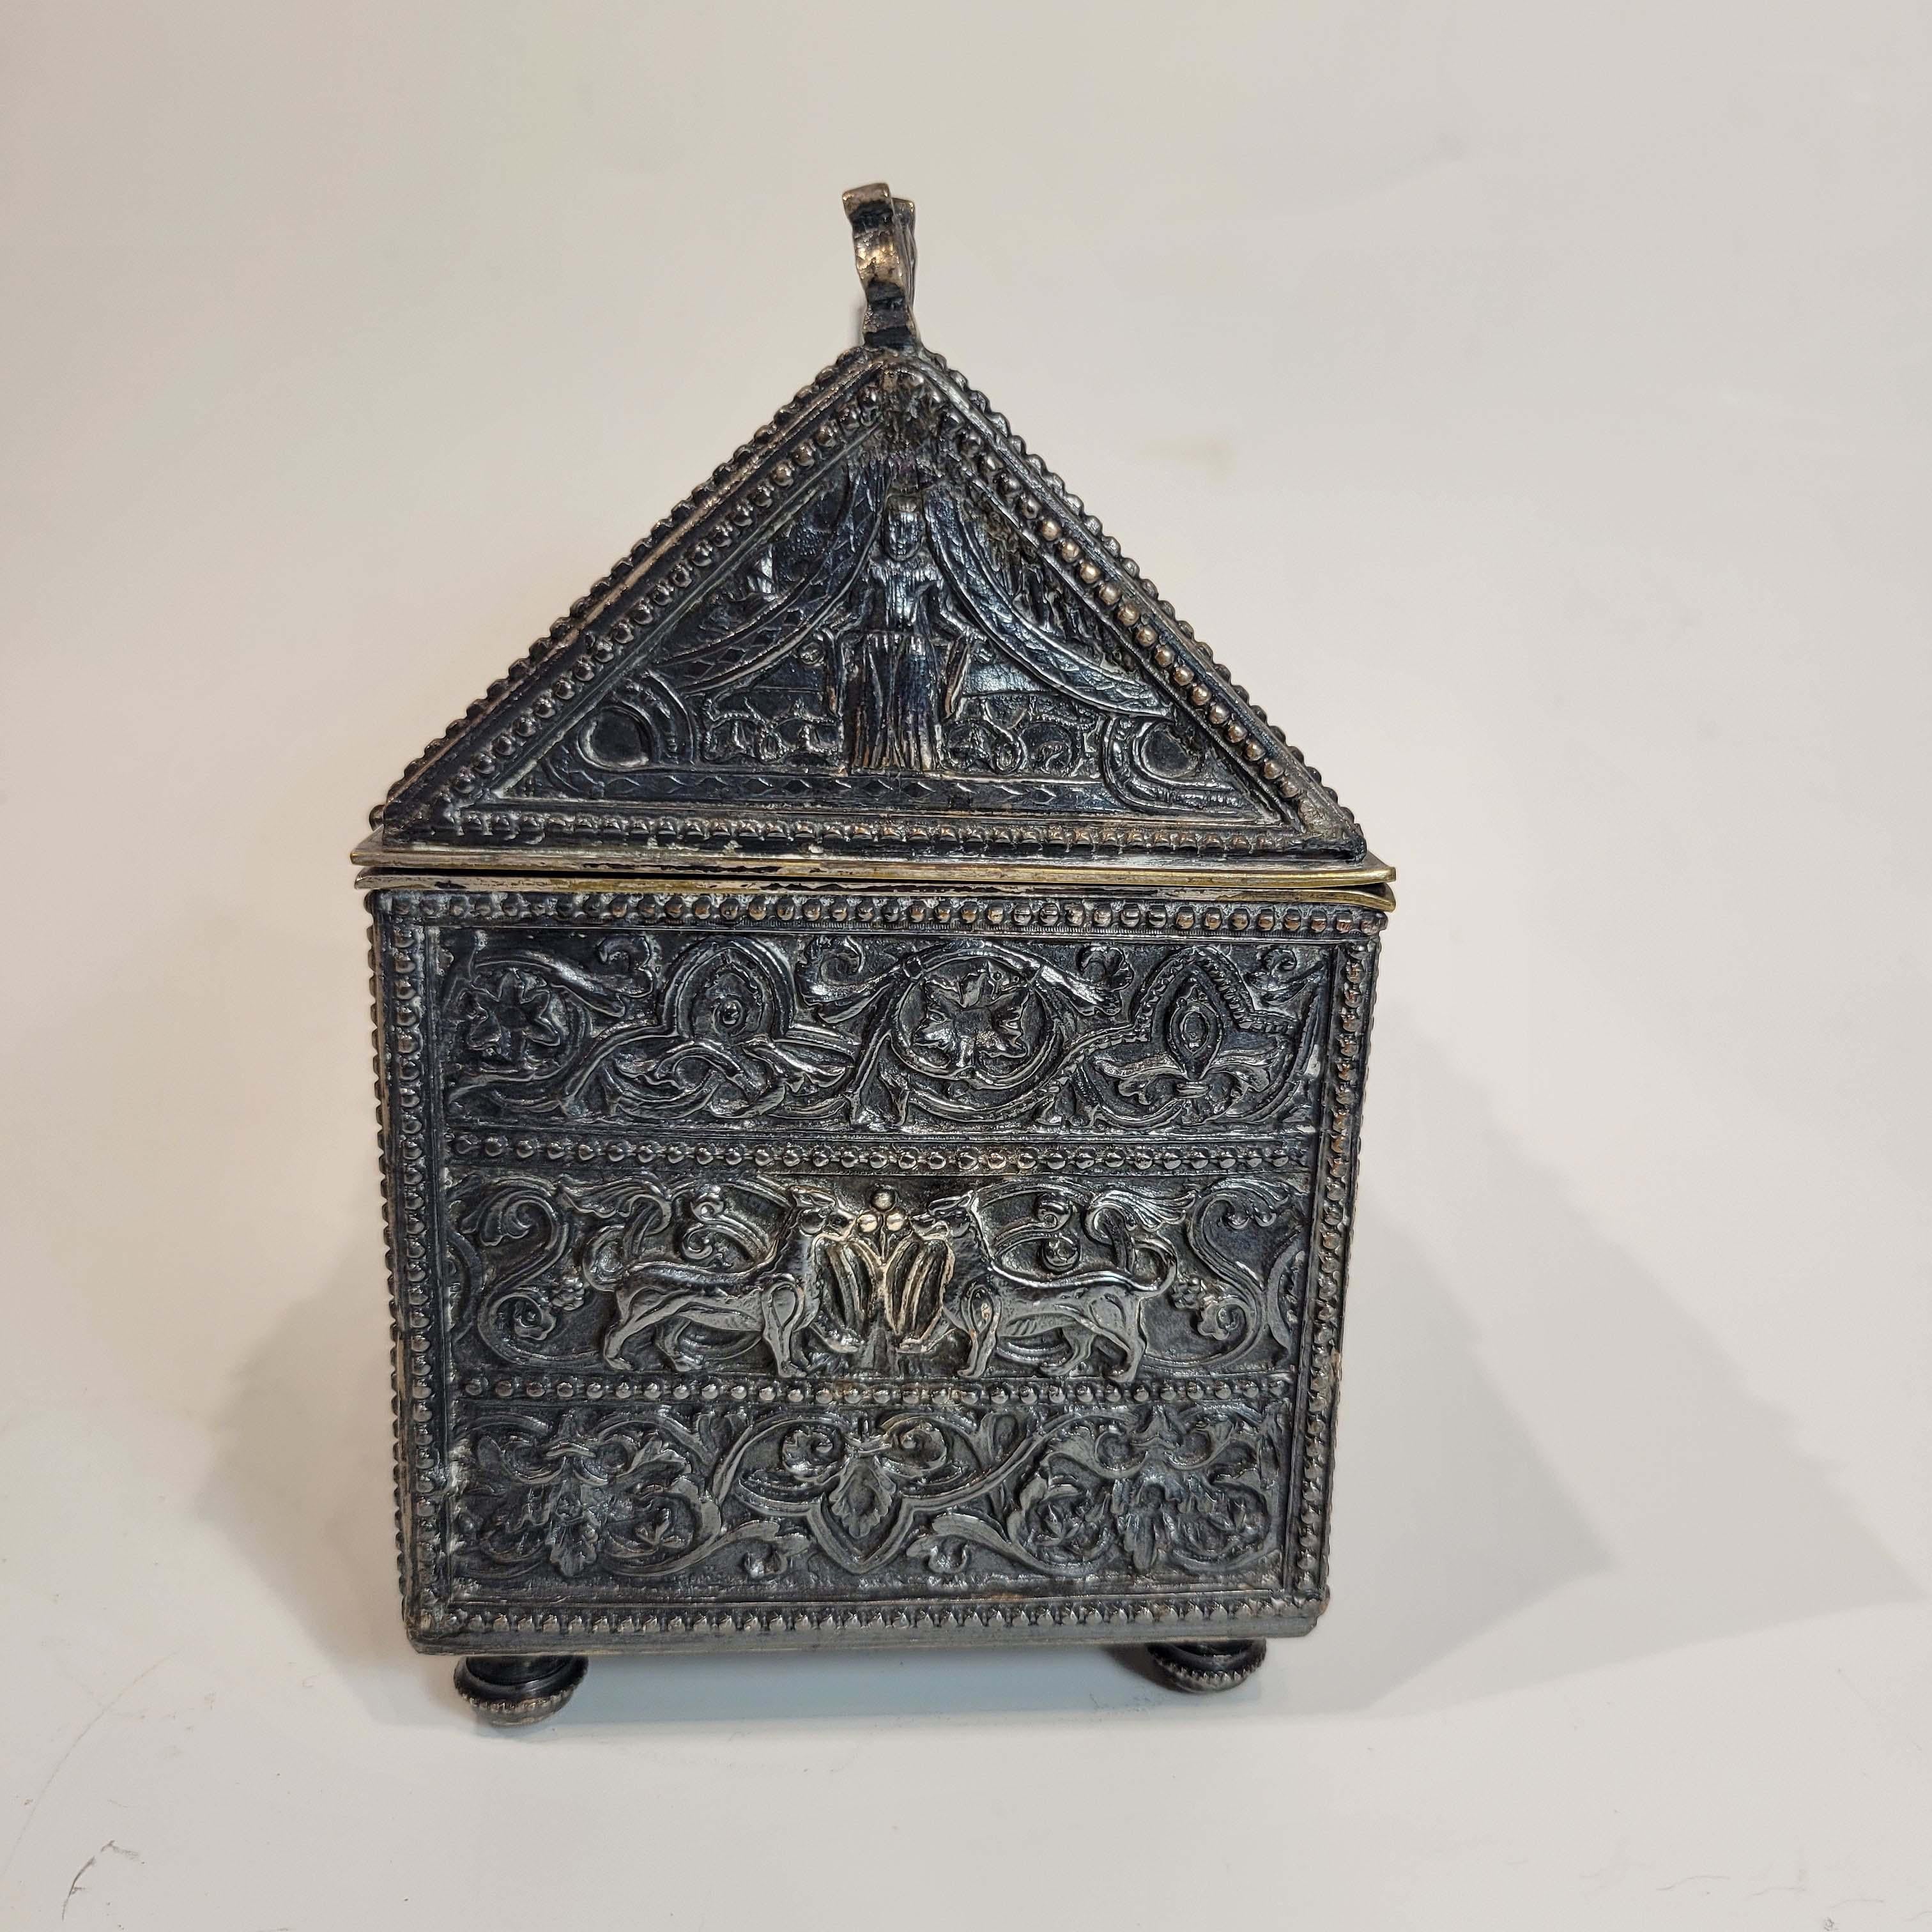 Plated French Gothic Revival Cigar Box Casket 19C.